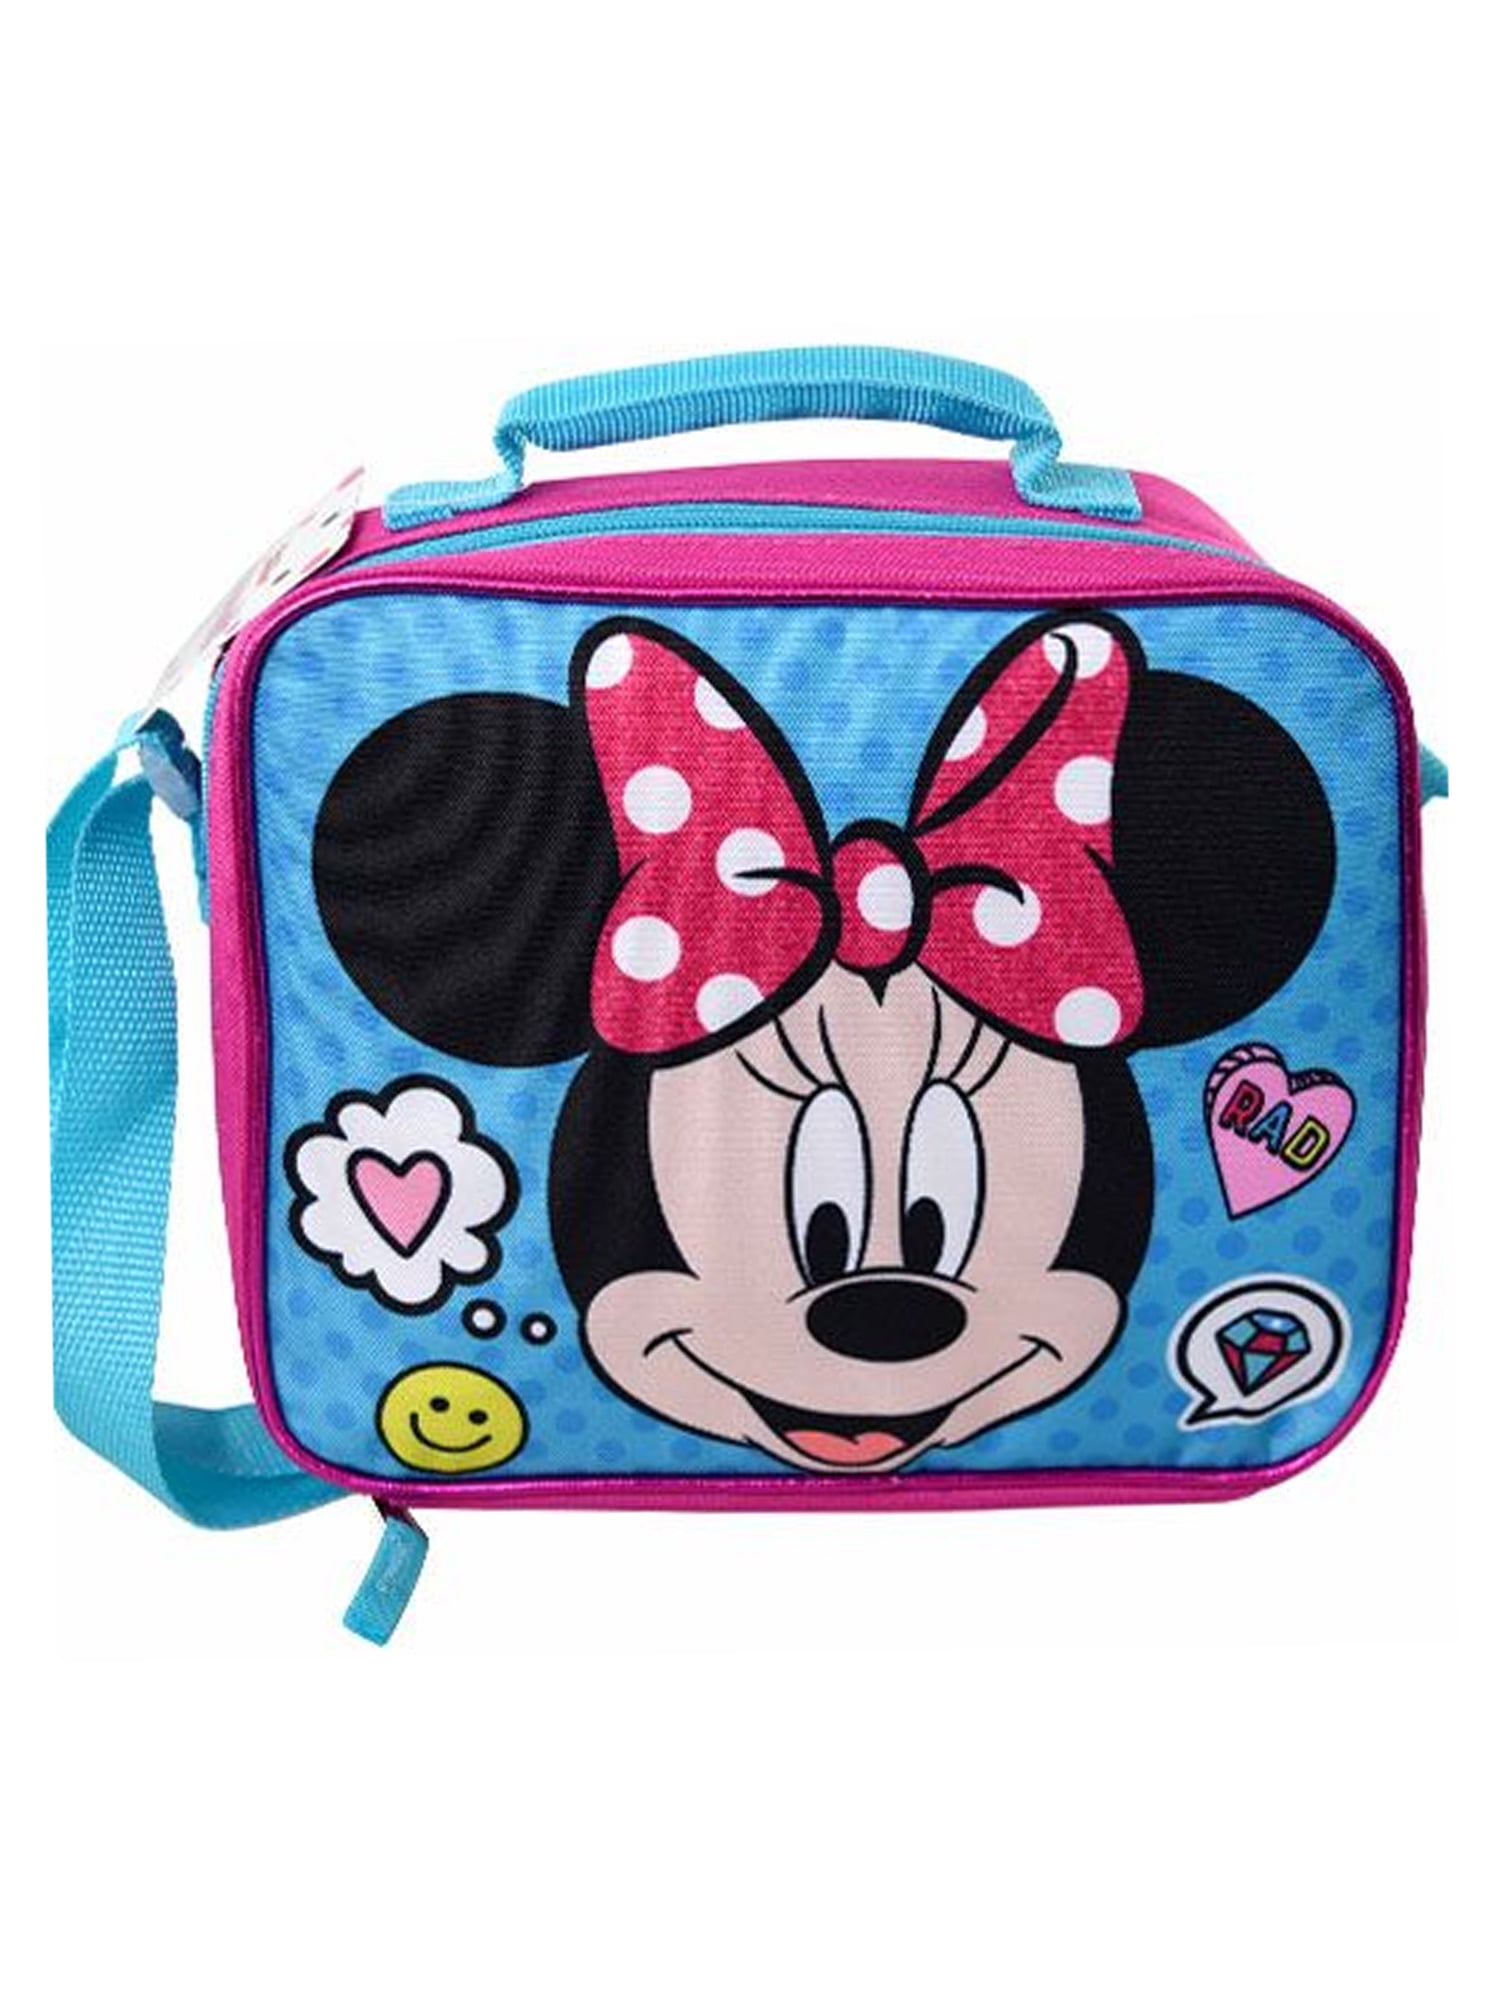 Insulated Lunch Bag With Adjustable Shoulder Strap or Carry Handle Mickey Mouse for sale online